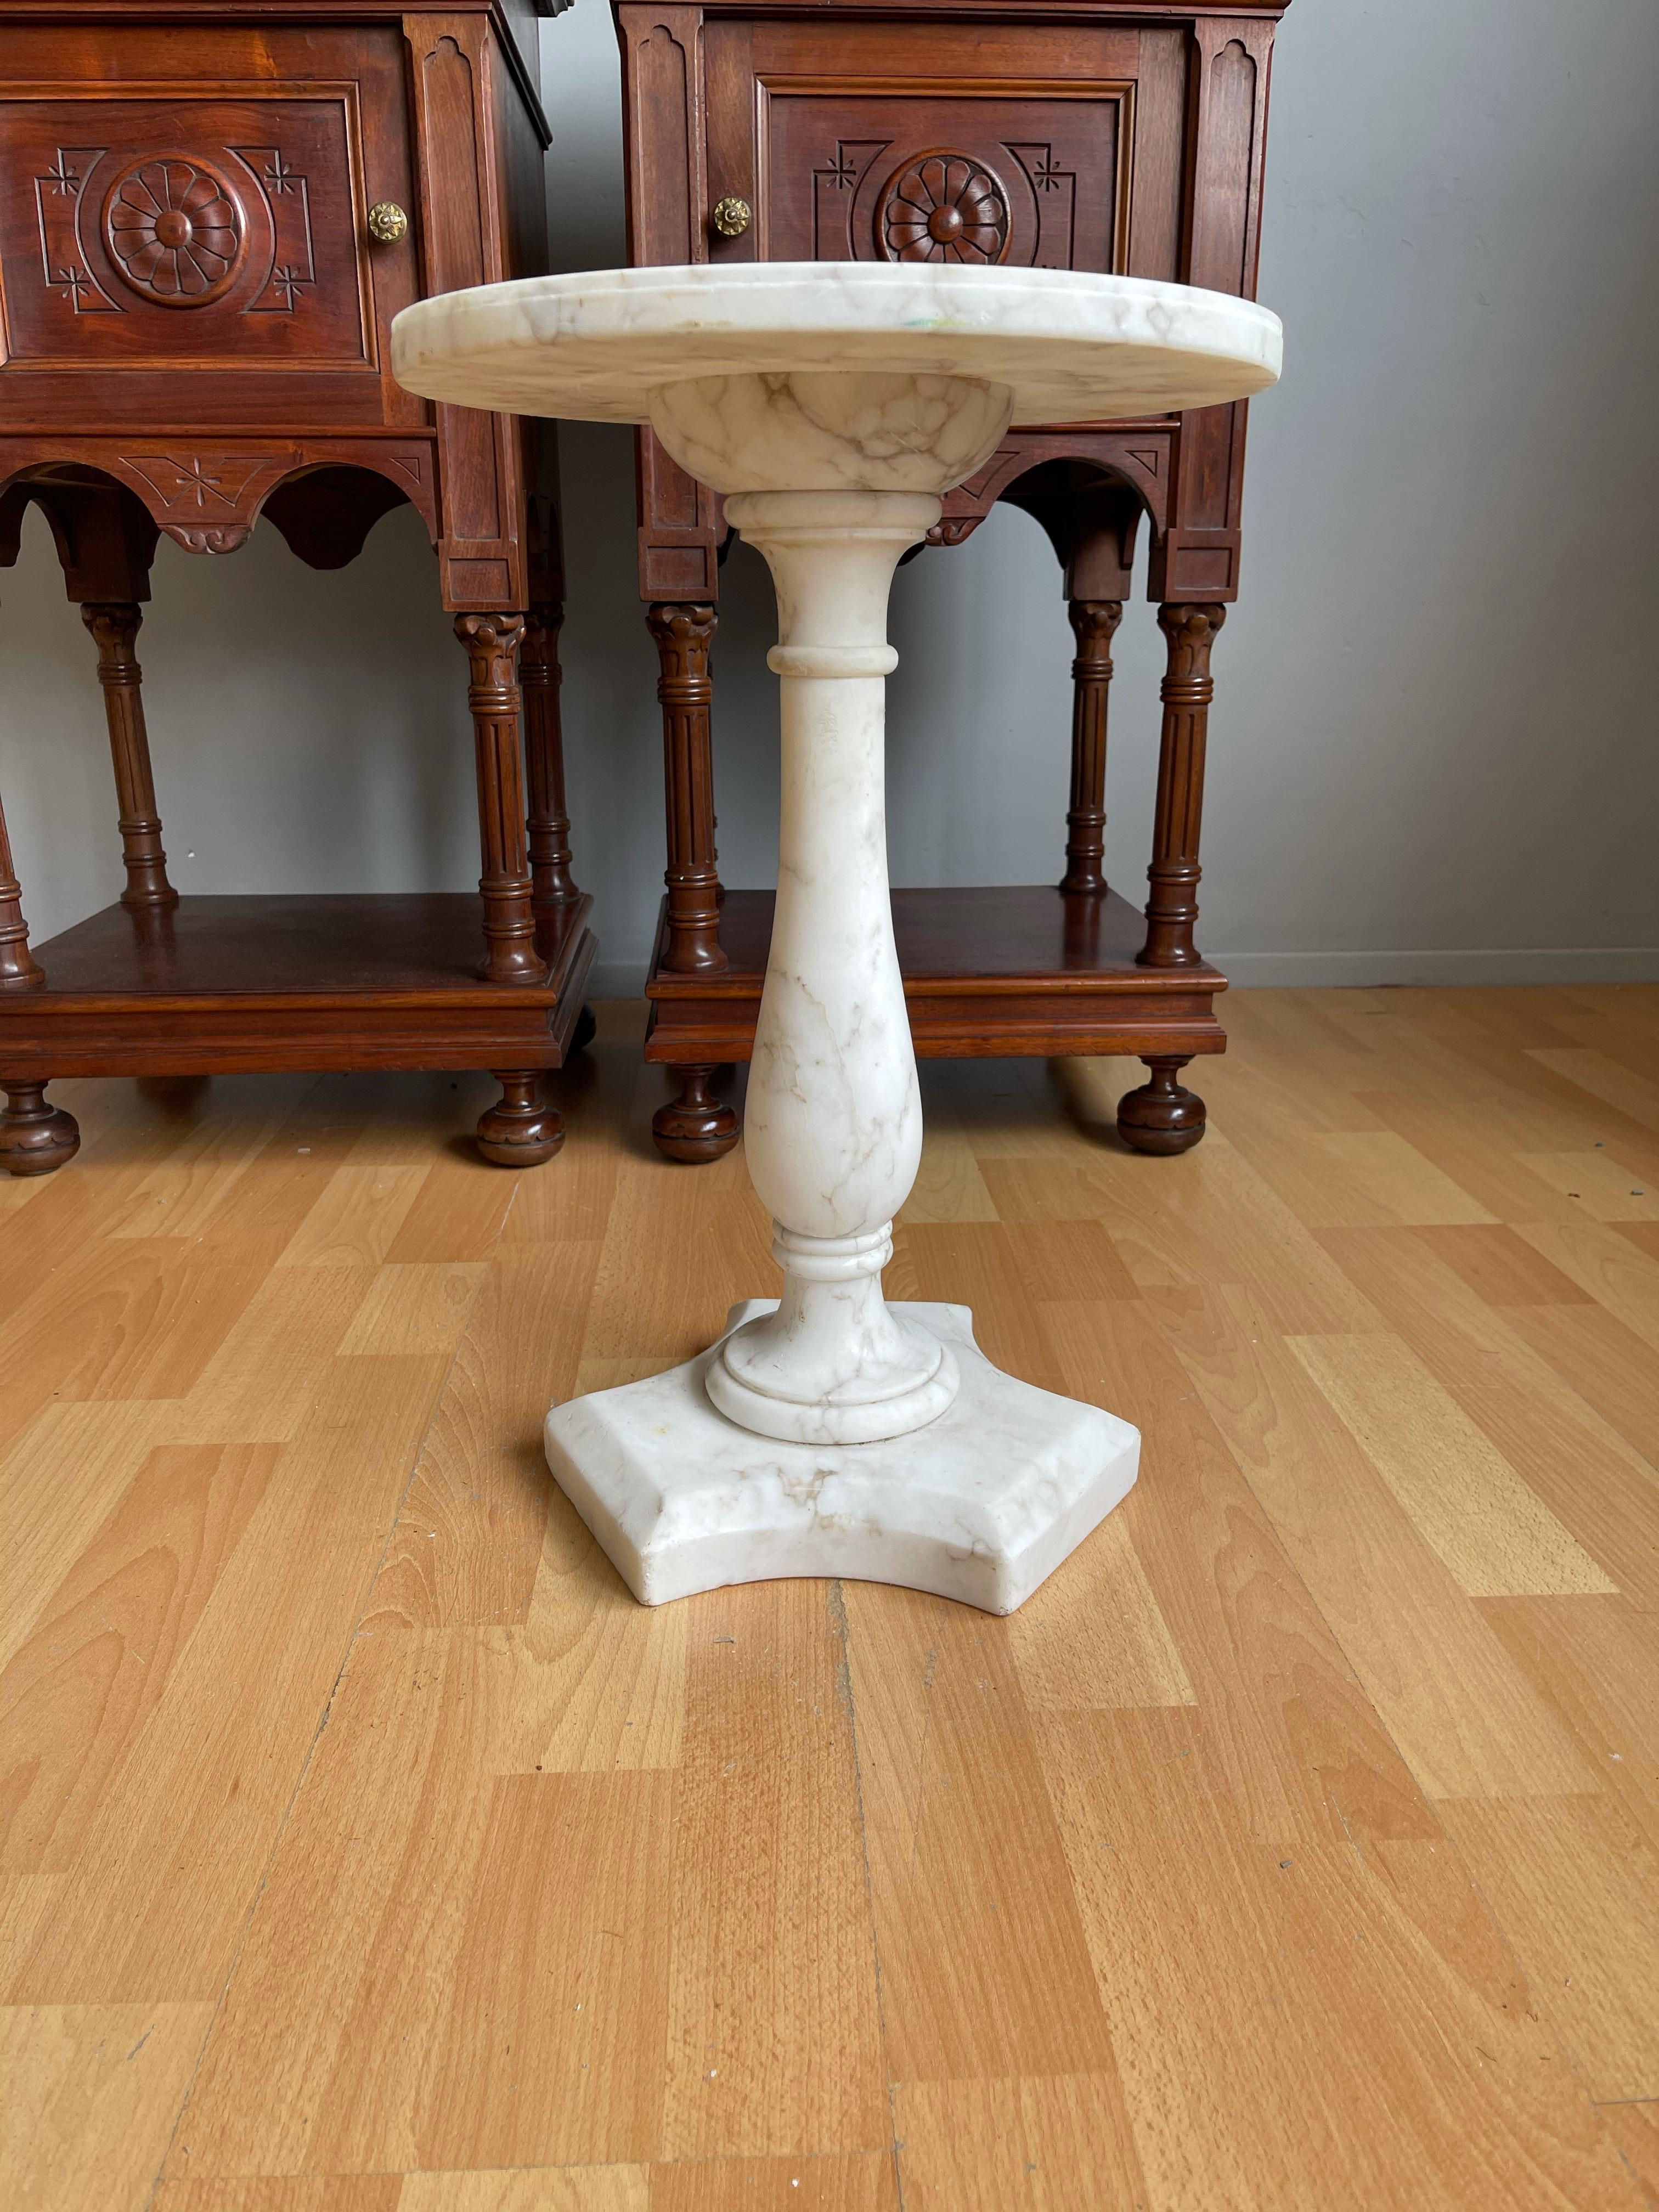 Italian Design Midcentury Modern White Carrara Marble Pedestal Stand / End Table For Sale 5